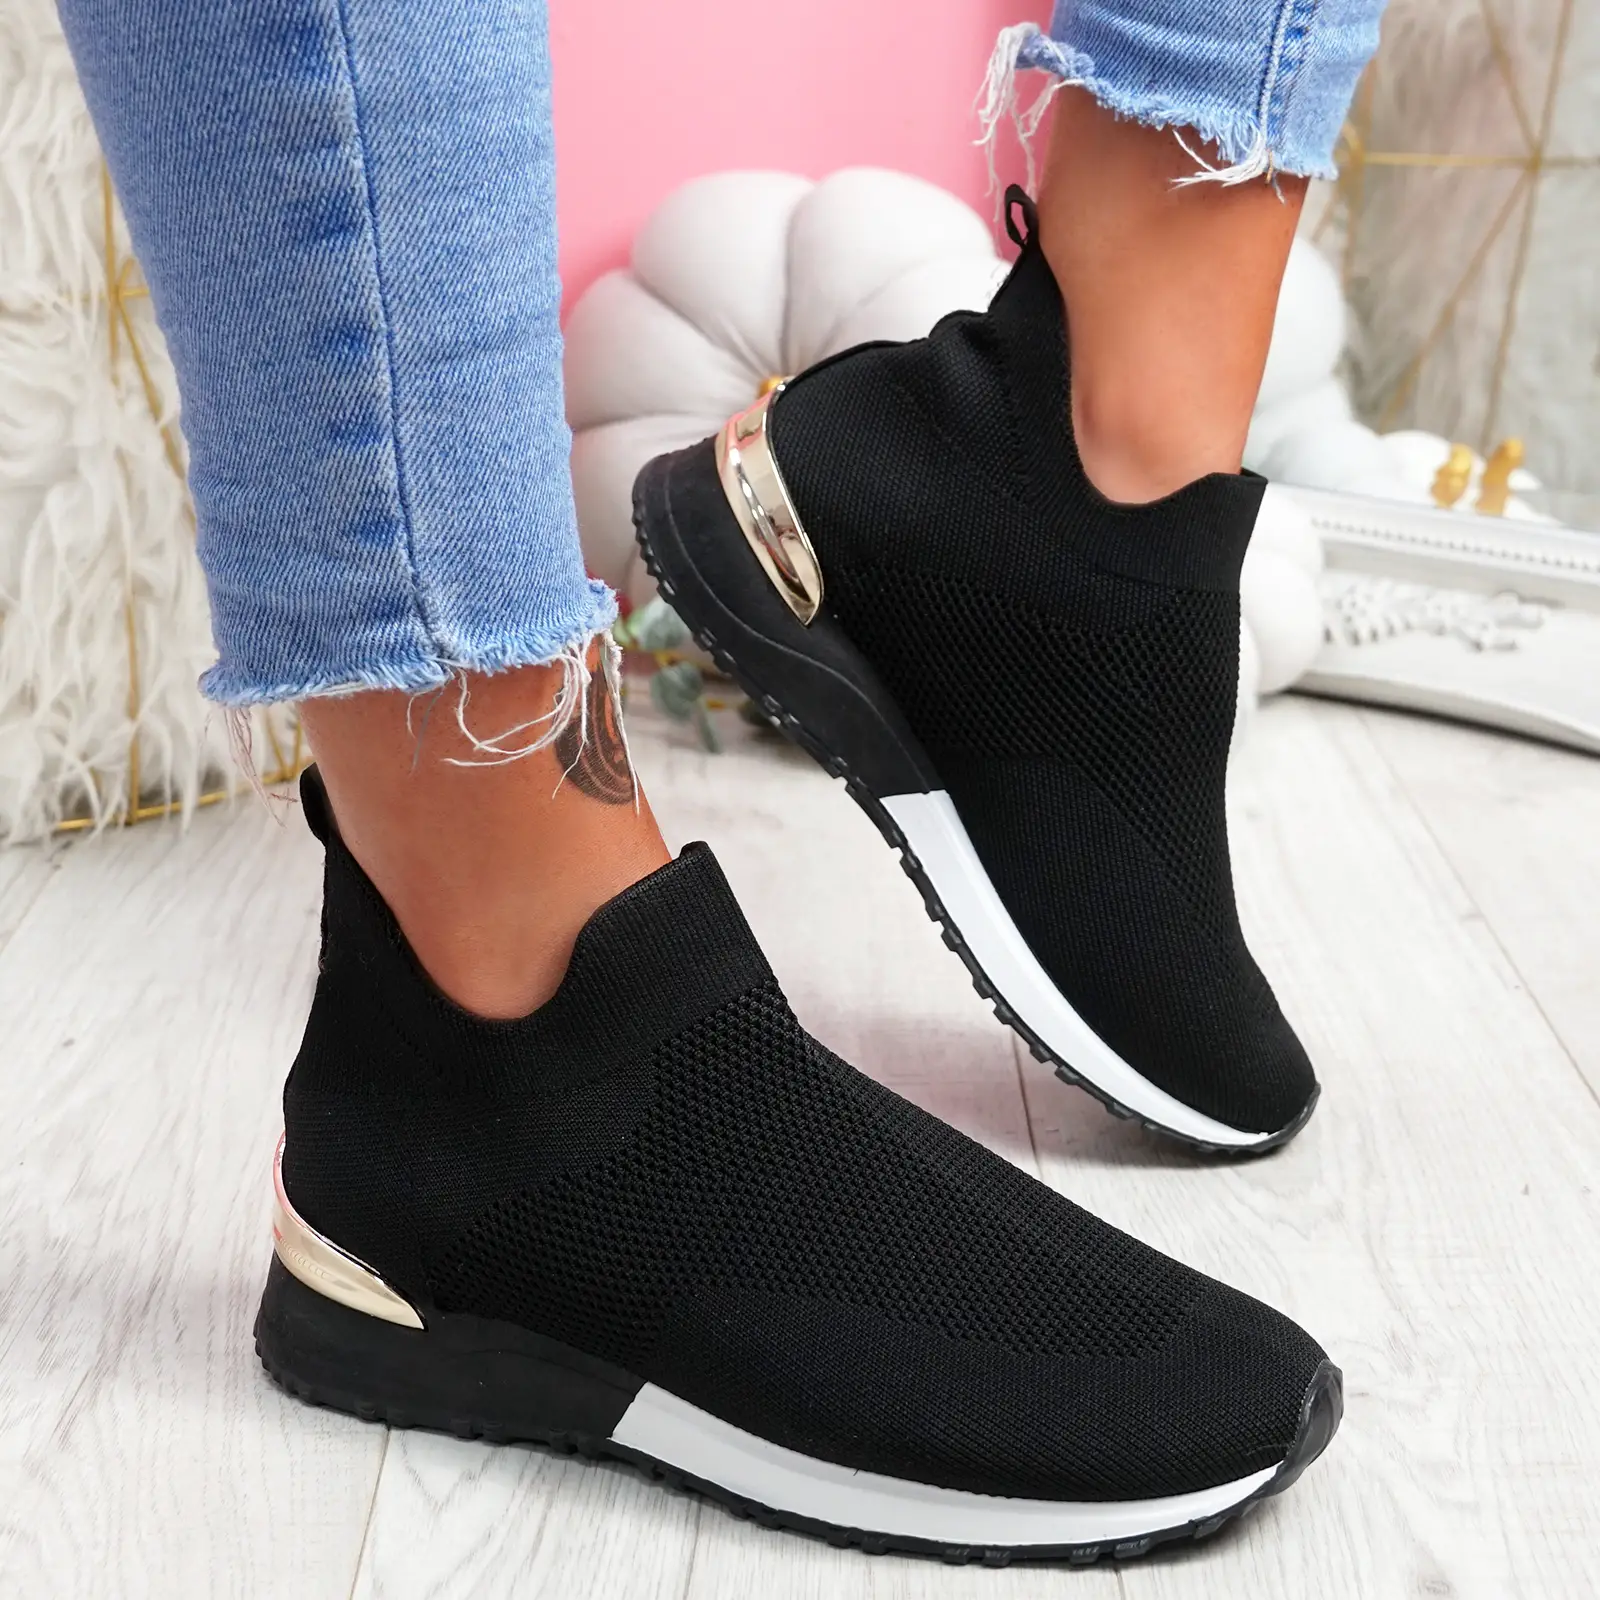 WOMENS LADIES SPORT SLIP ON TRAINERS KNIT SNEAKERS PULL ON WOMEN SHOES ...